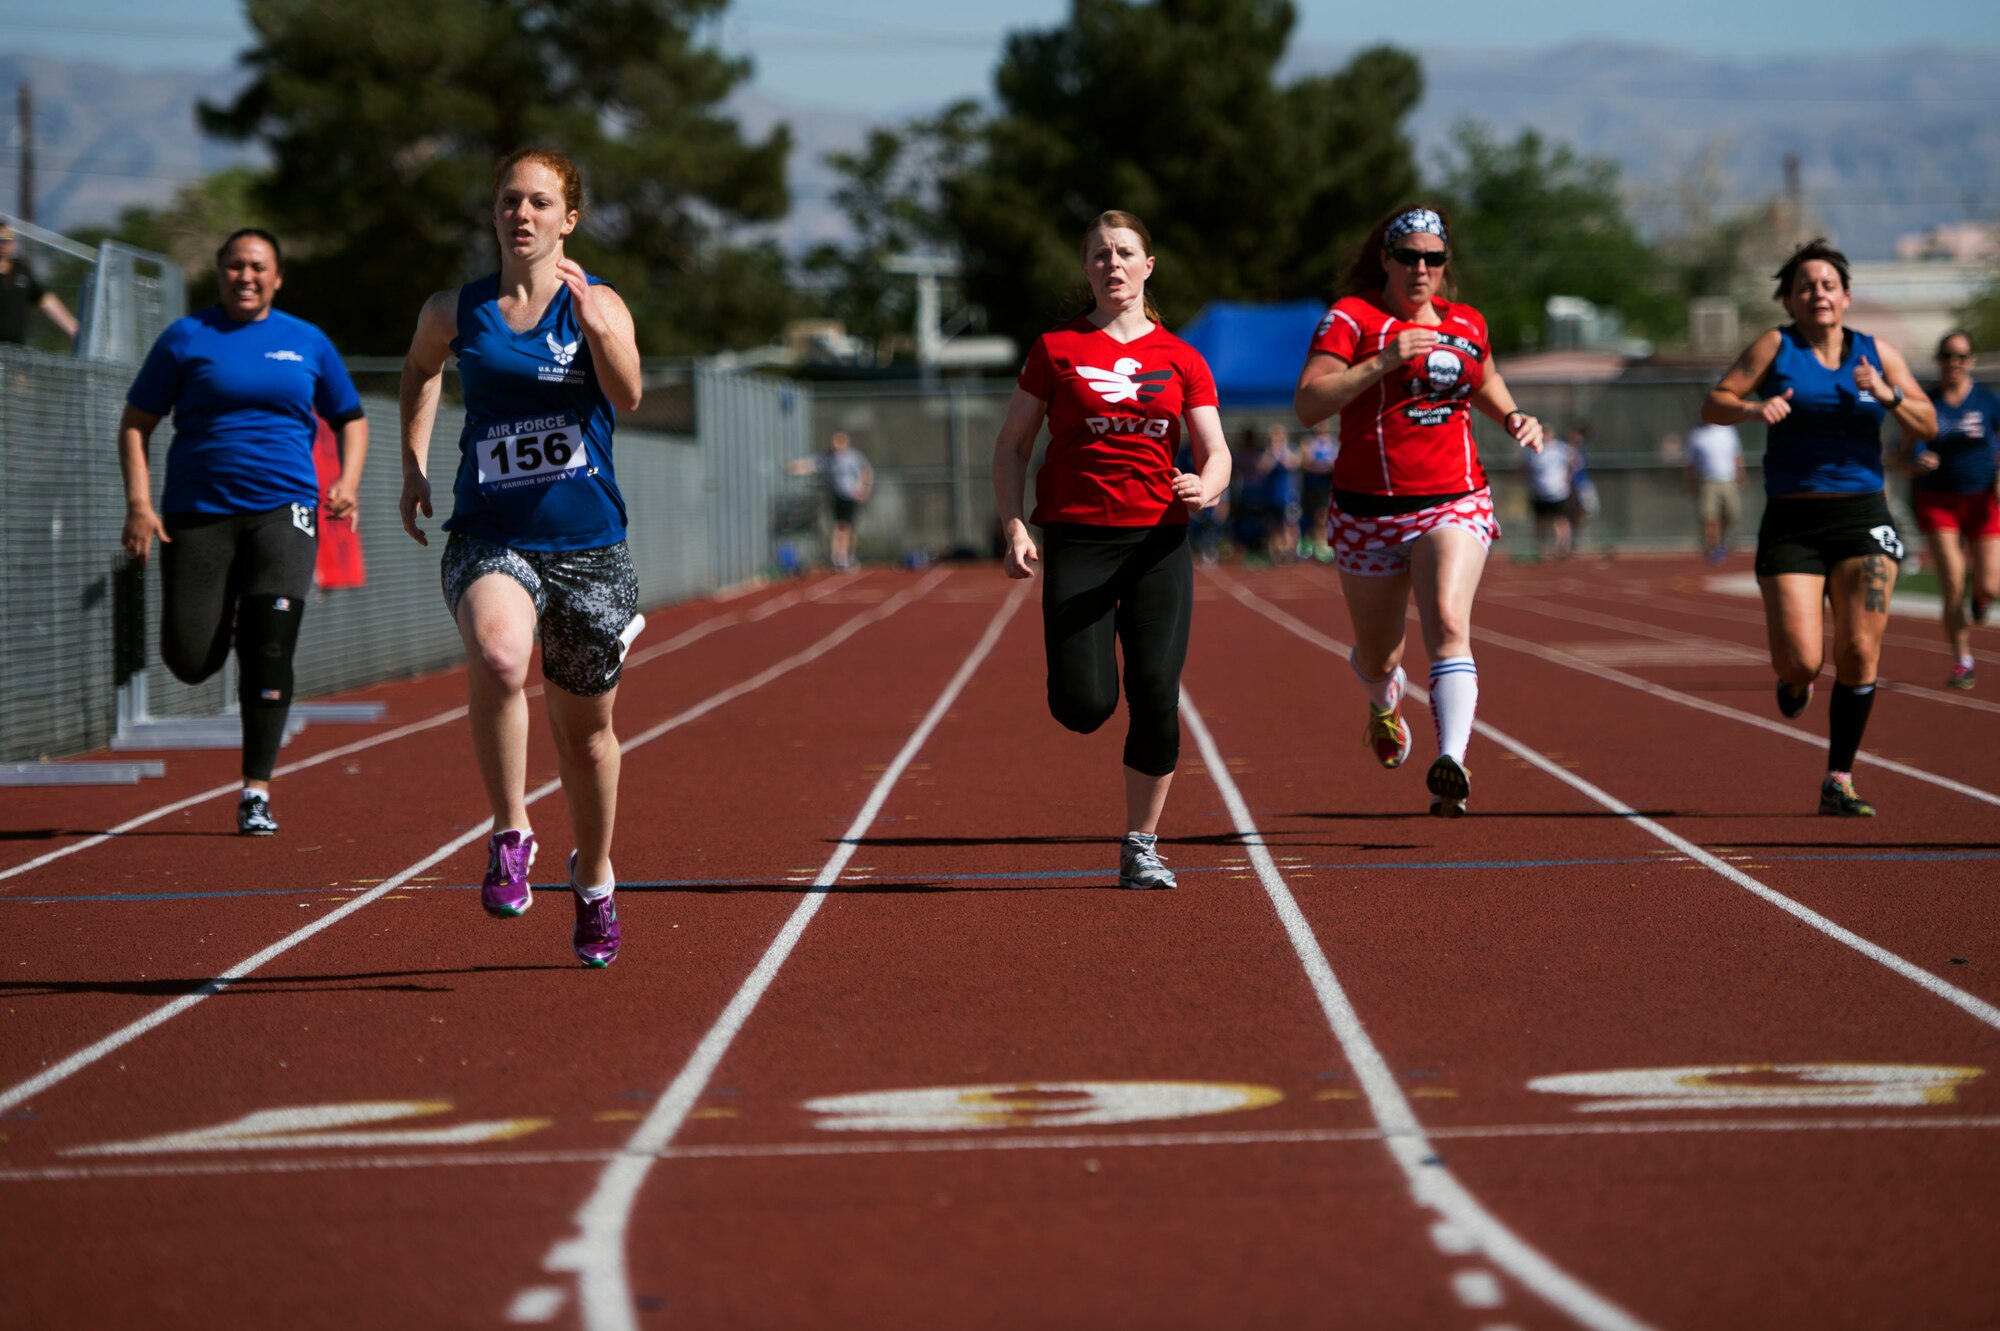 Airmen race to the finish line during the track and field portion of the Air Force Trials April 8, 2014, at Rancho High School in Las Vegas, Nev. The Air Force Trials give injured, ill and wounded Airmen a chance to compete in Paralympic-style events.  (U.S. Air Force photo/Senior Airman Jette Carr)